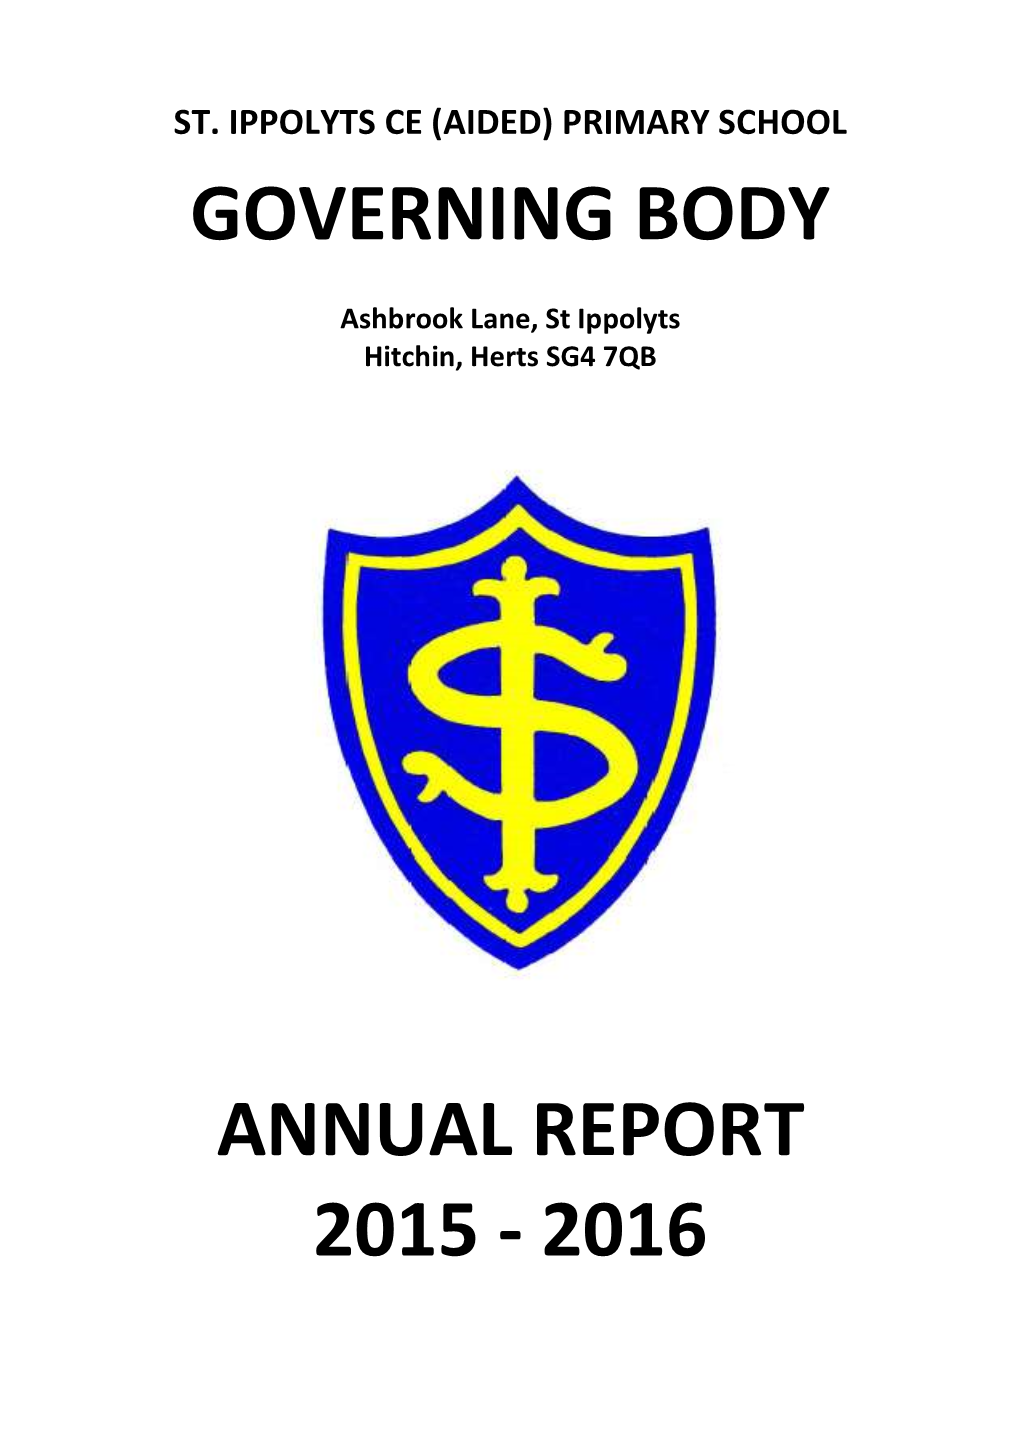 Governing Body Annual Report 2015